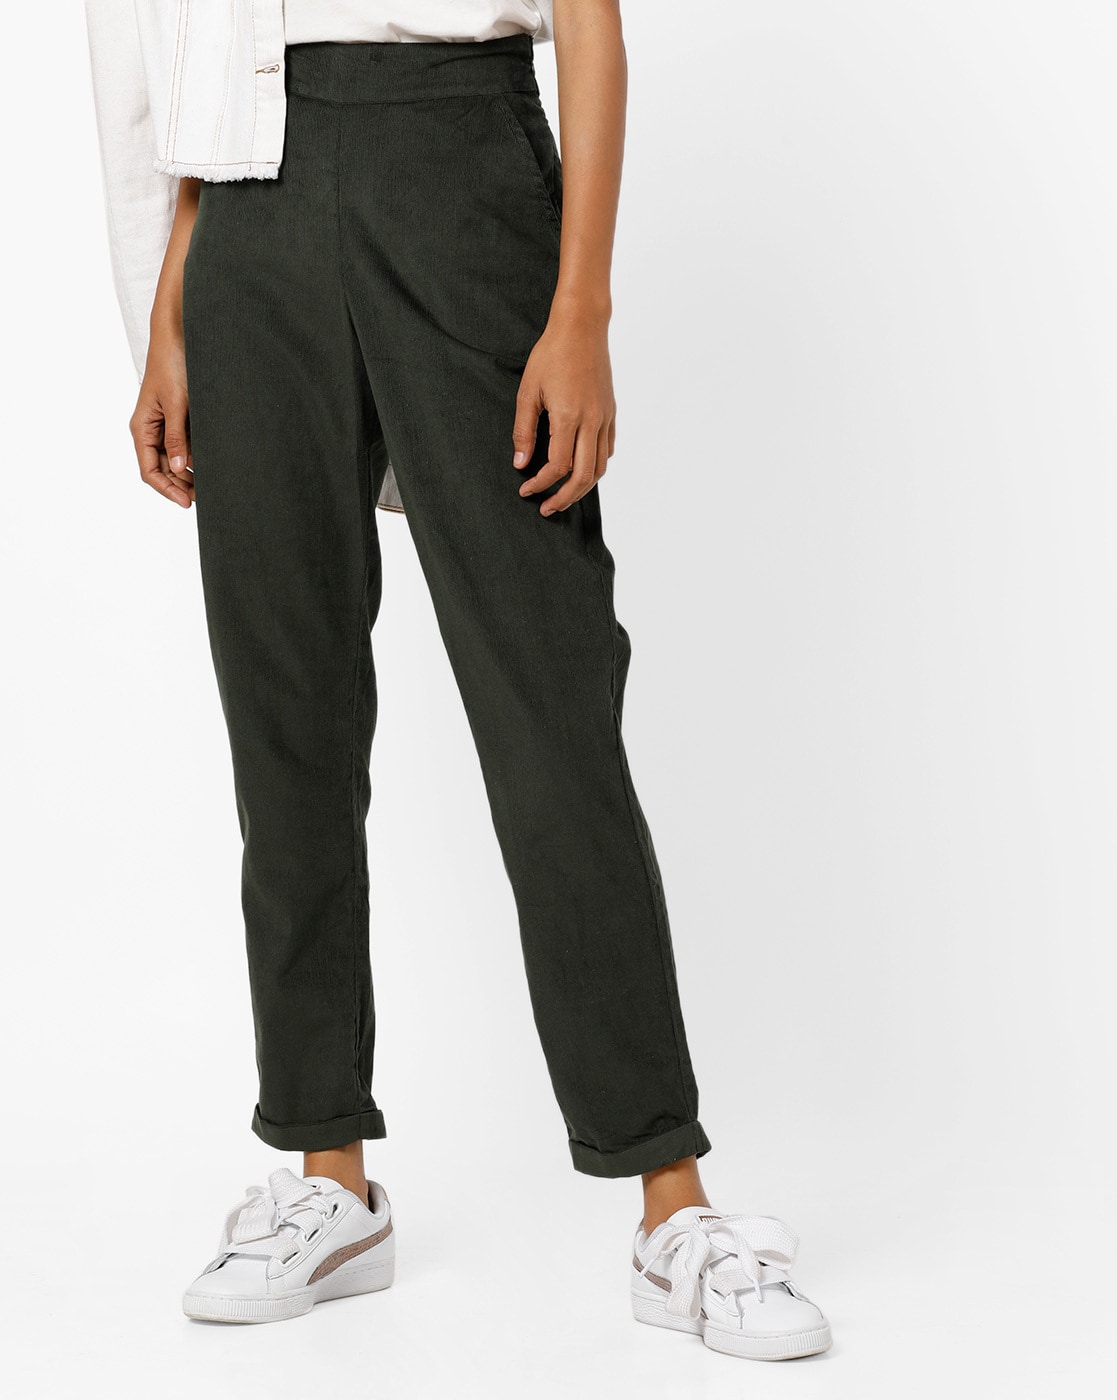 Buy Olive Trousers & Pants for Women by Tulsattva Online